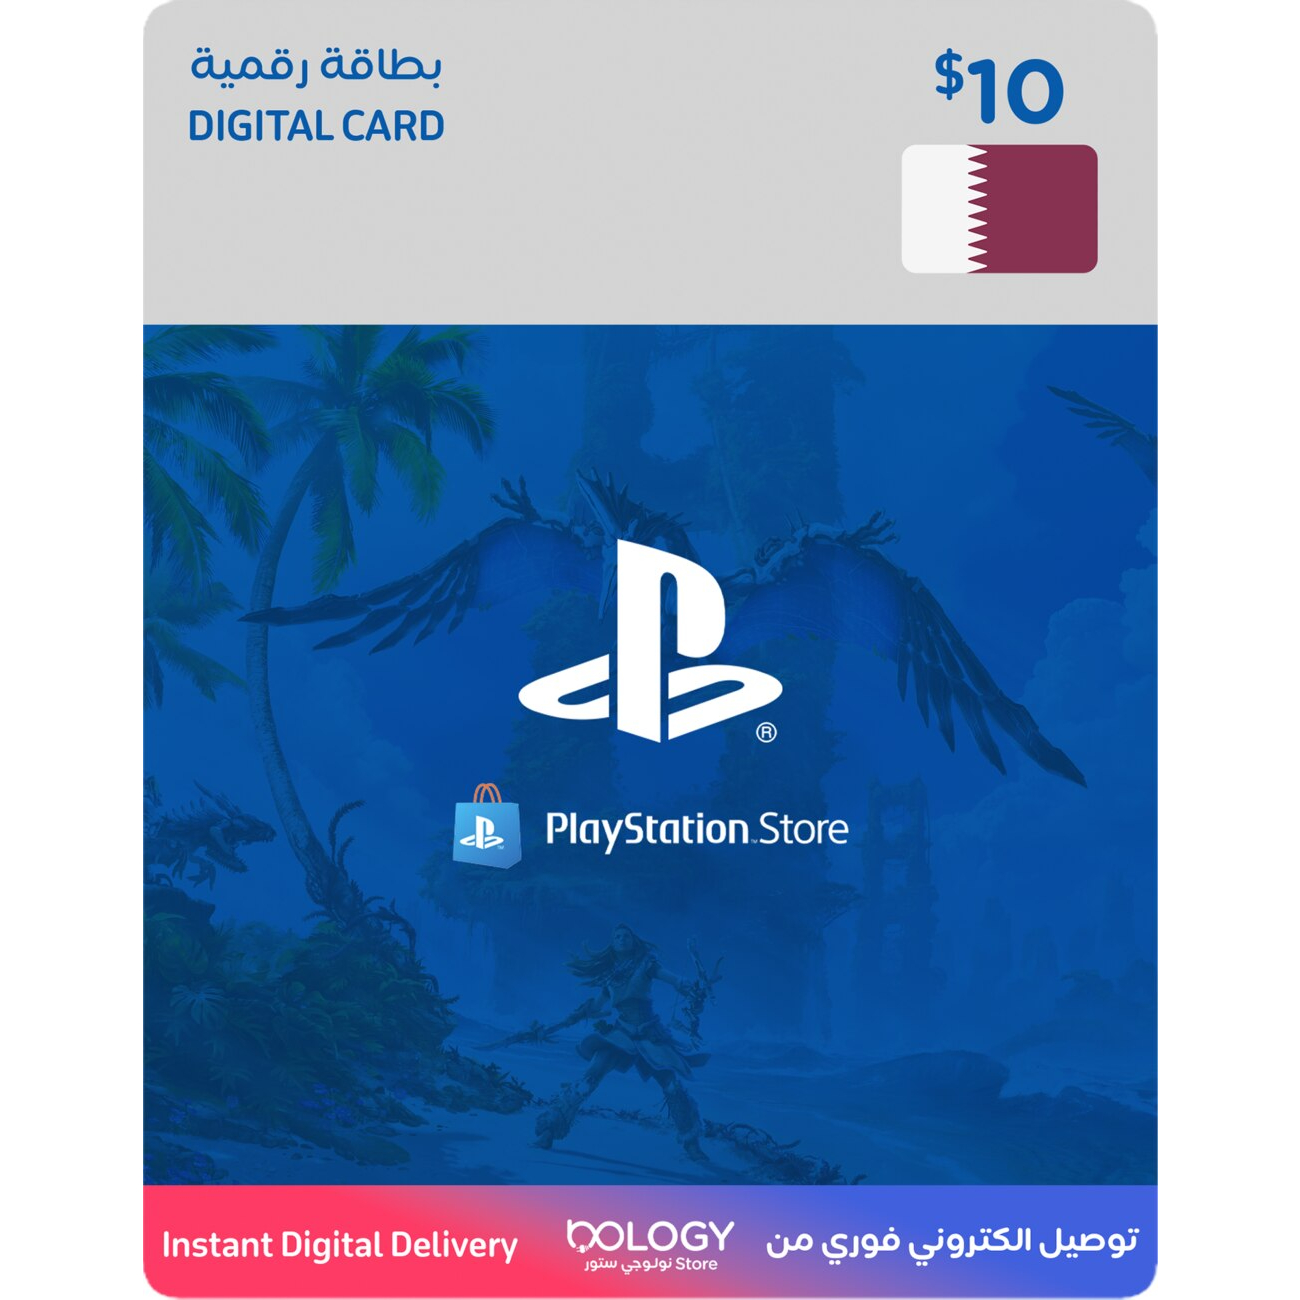 Roblox Gift Cards with Instant Email Delivery in Qatar from Nology Store